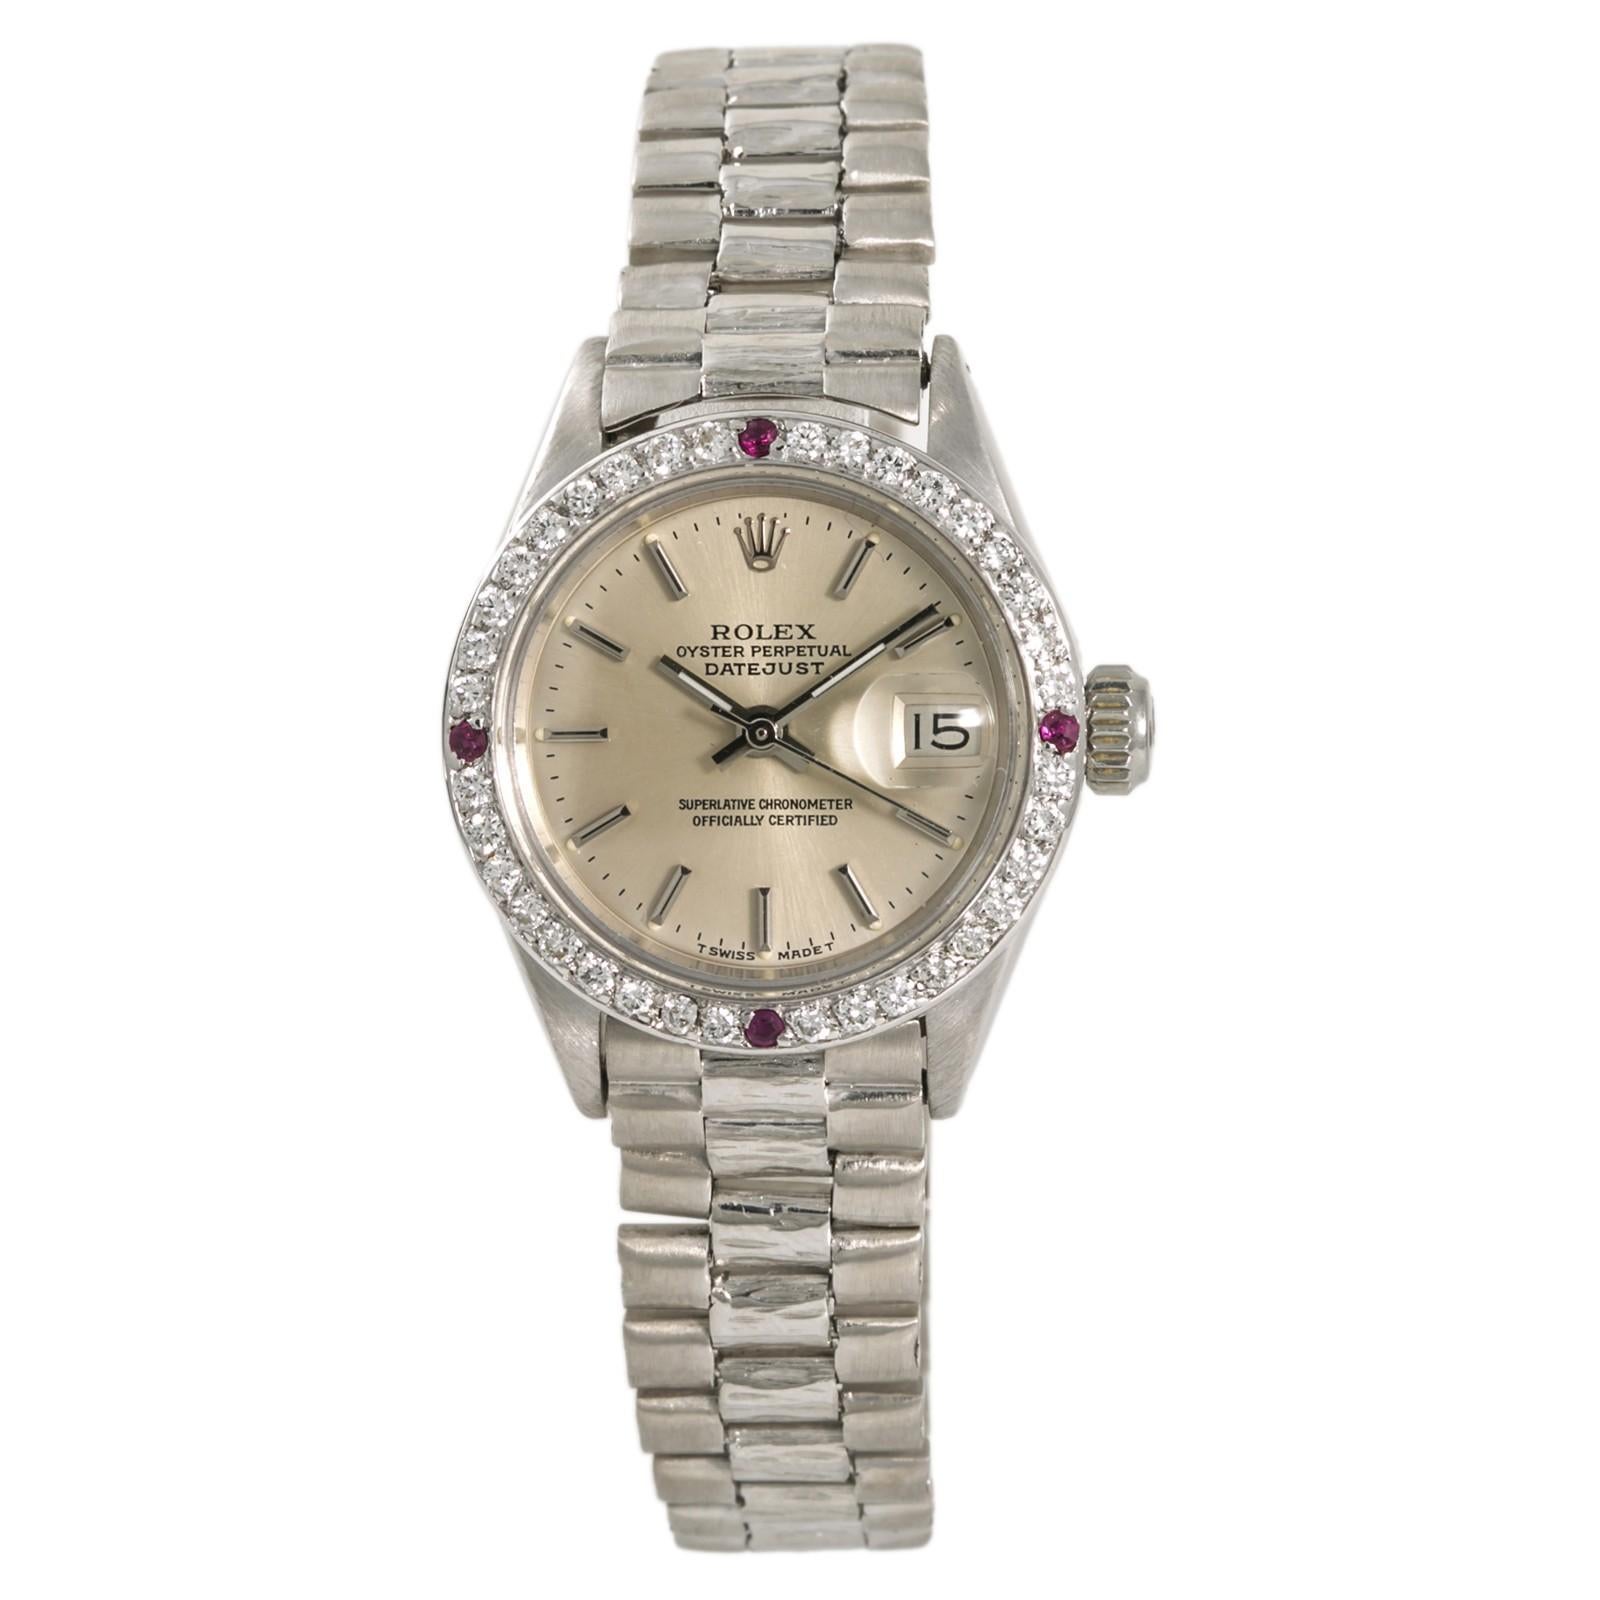 Rolex Datejust 6917, Silver Dial Certified Authentic For Sale